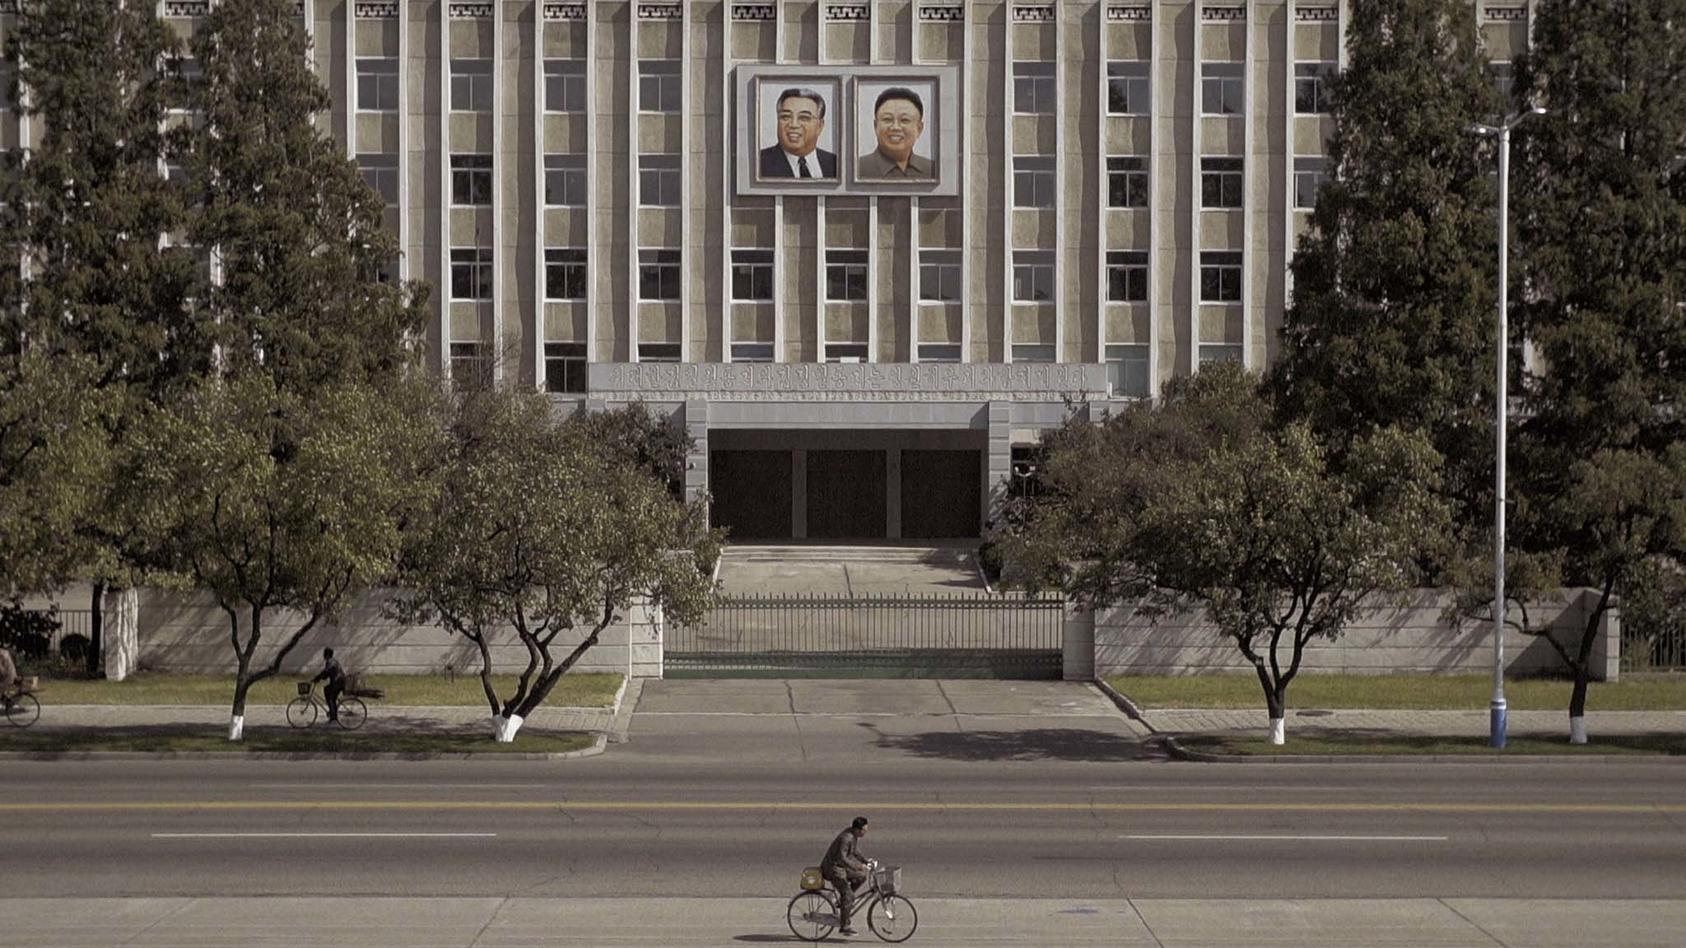 Portraits of Kim Il-Sung, the founder of North Korea and his son, Kim Jong-il, hang on a building in the capital, Pyongyang, Sept. 29, 2017. (Jonah M. Kessel/The New York Times)